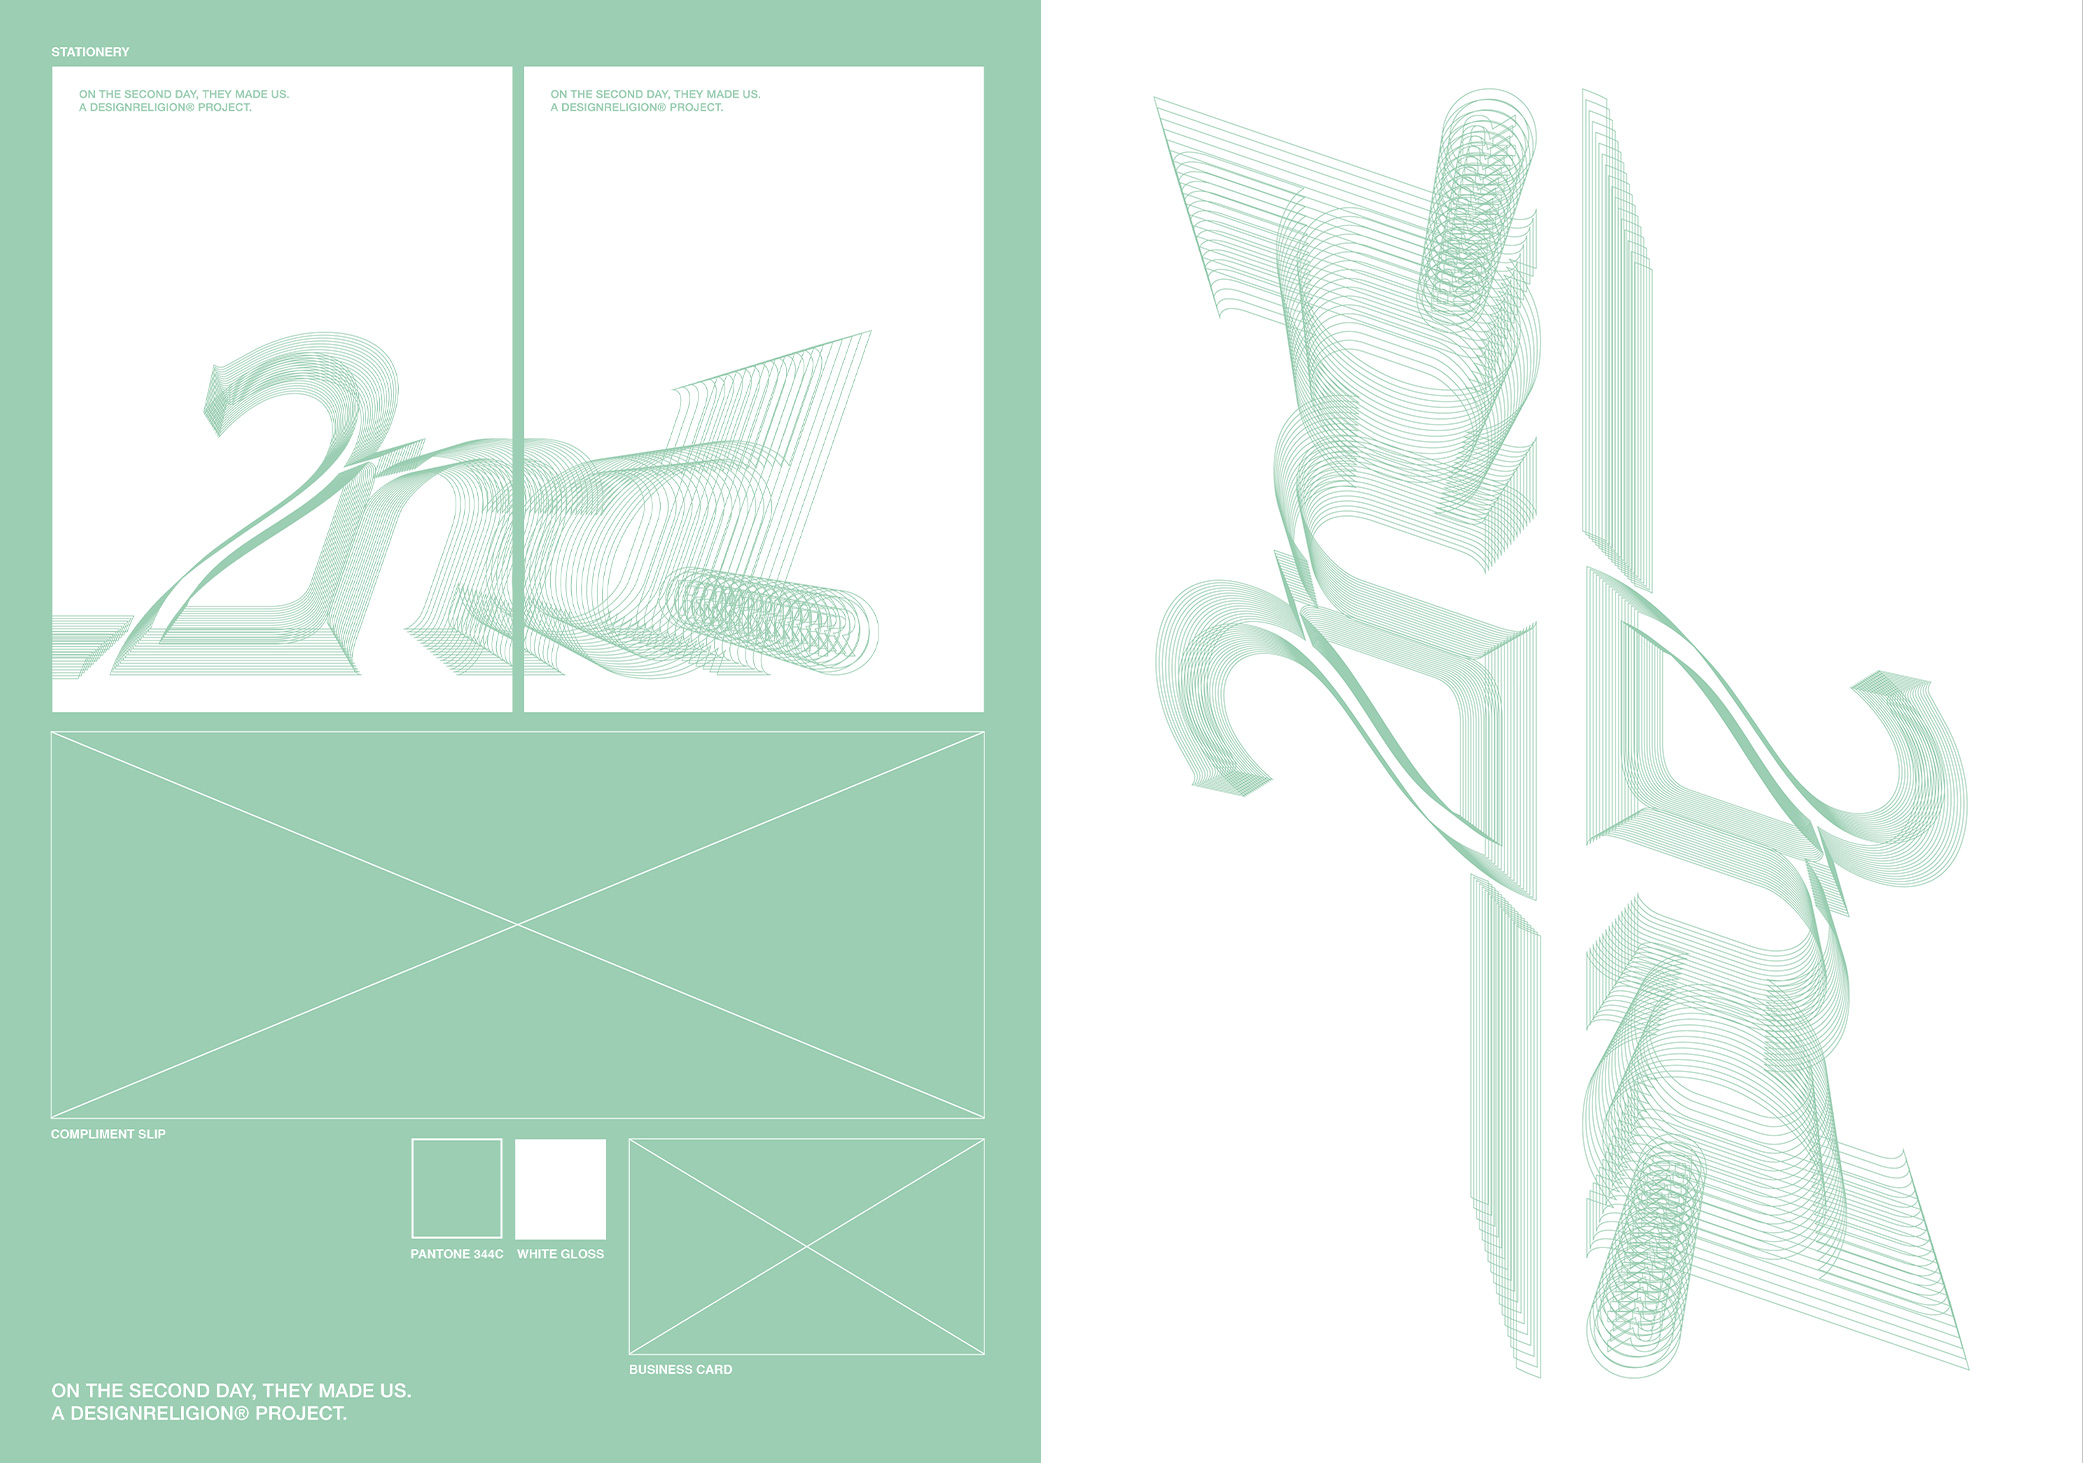 Experimental vector creative design using a logo based on the 2nd in a green and white colour palette